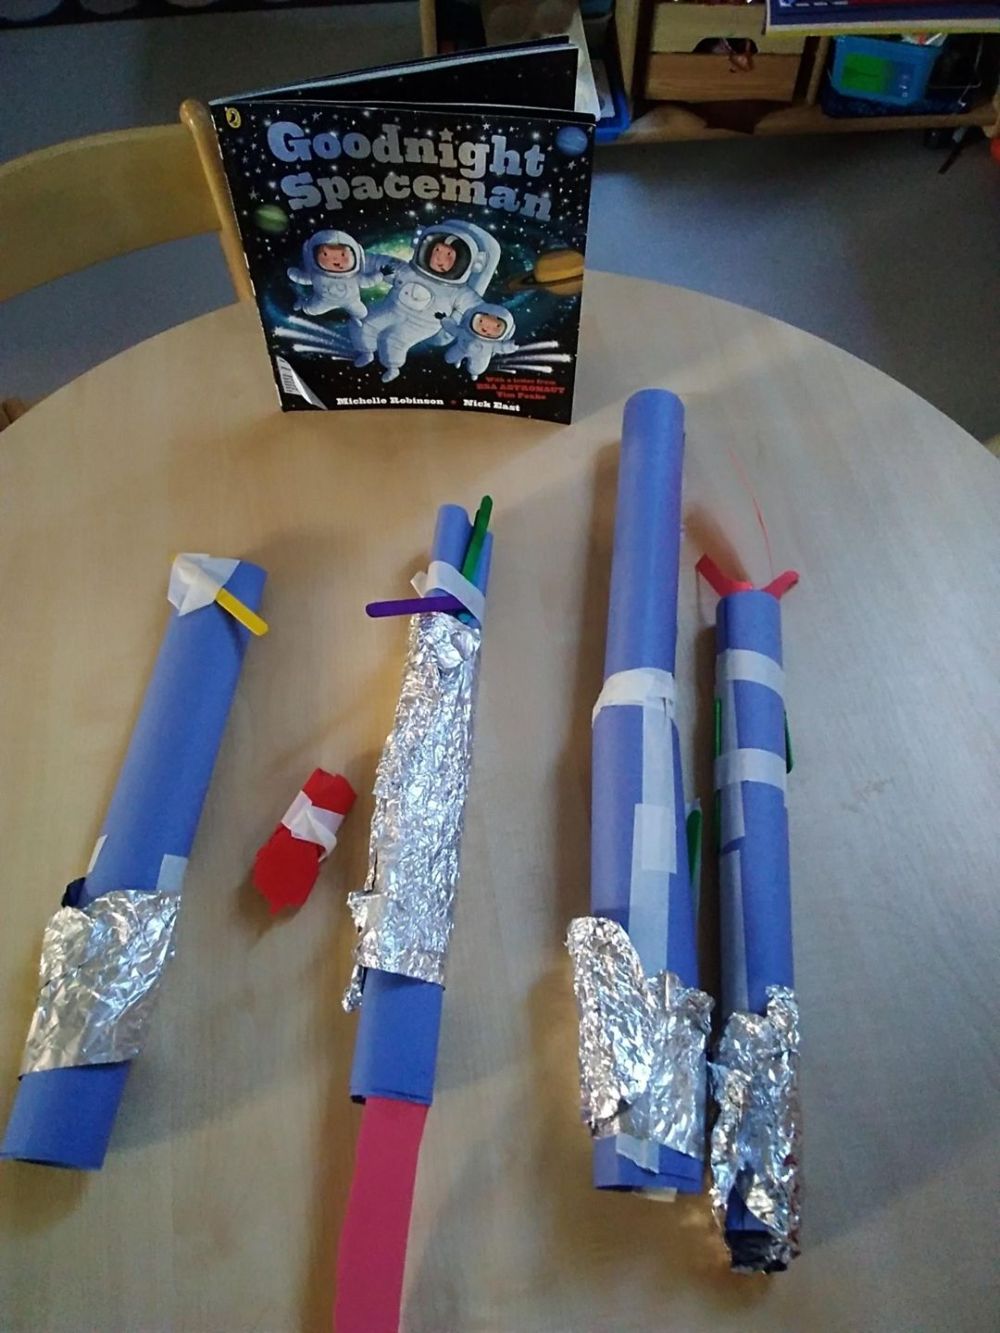 Our space rockets